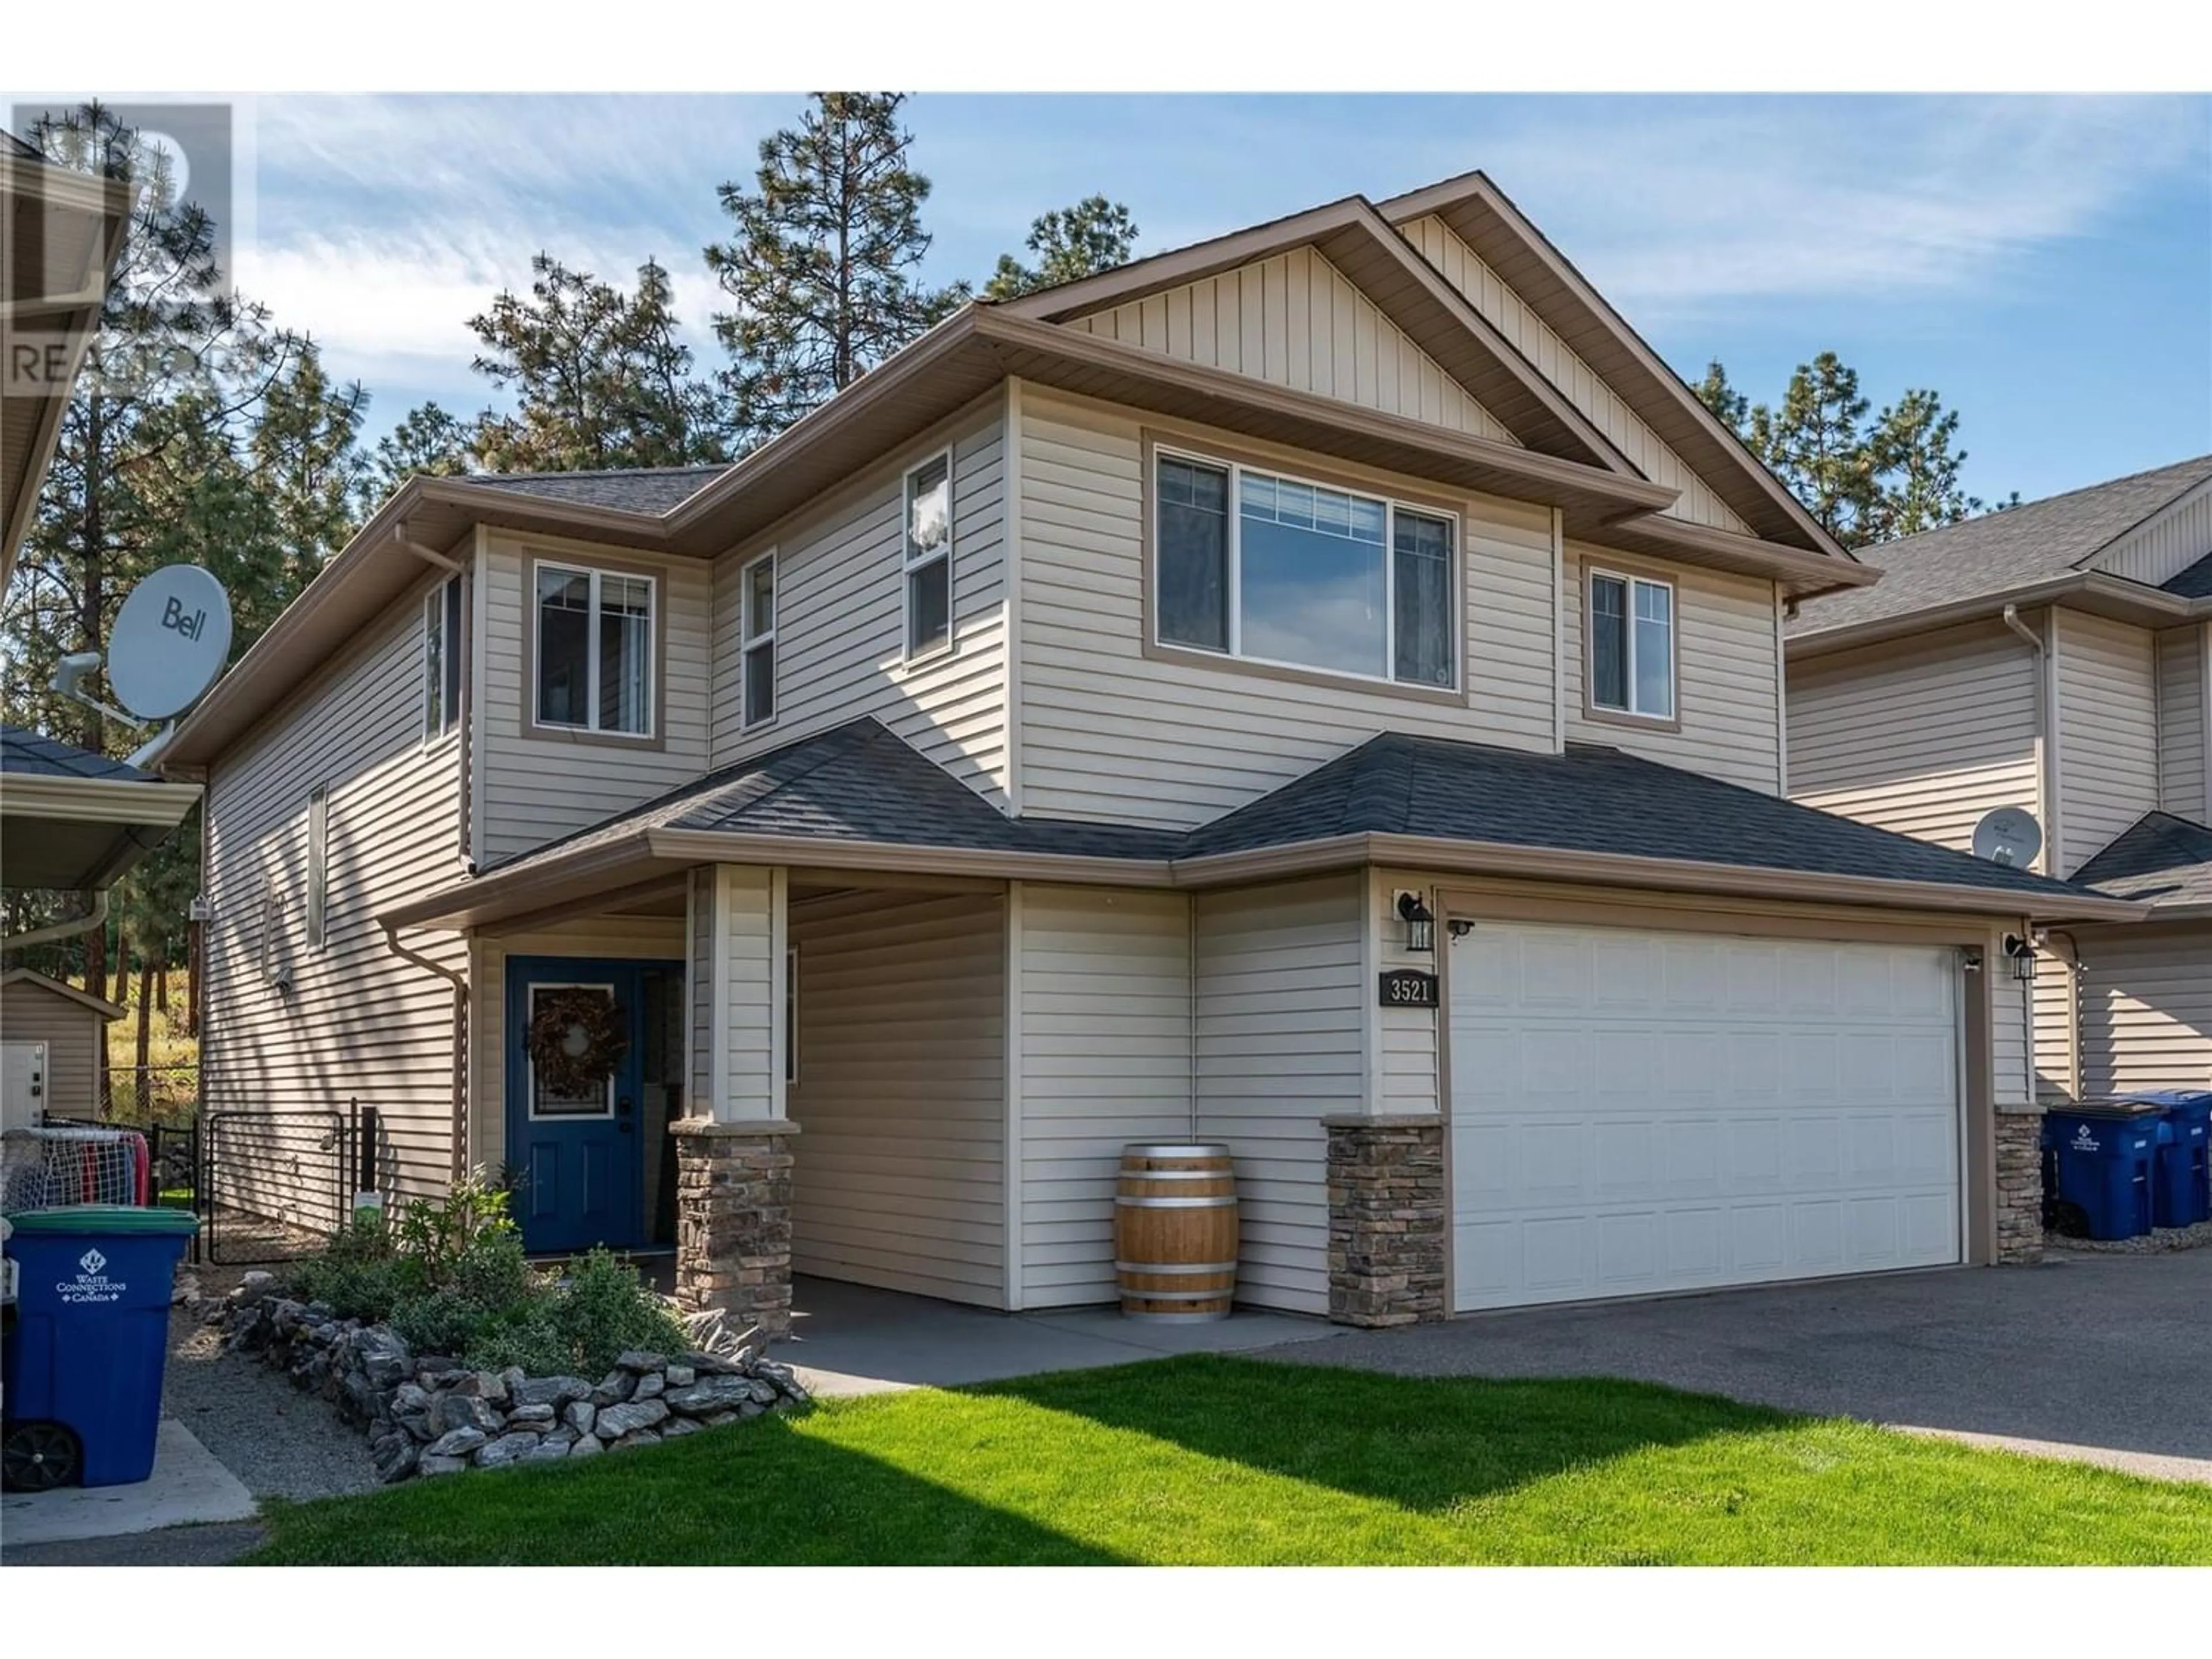 Frontside or backside of a home for 3521 Creekview Crescent, West Kelowna British Columbia V4T3C3